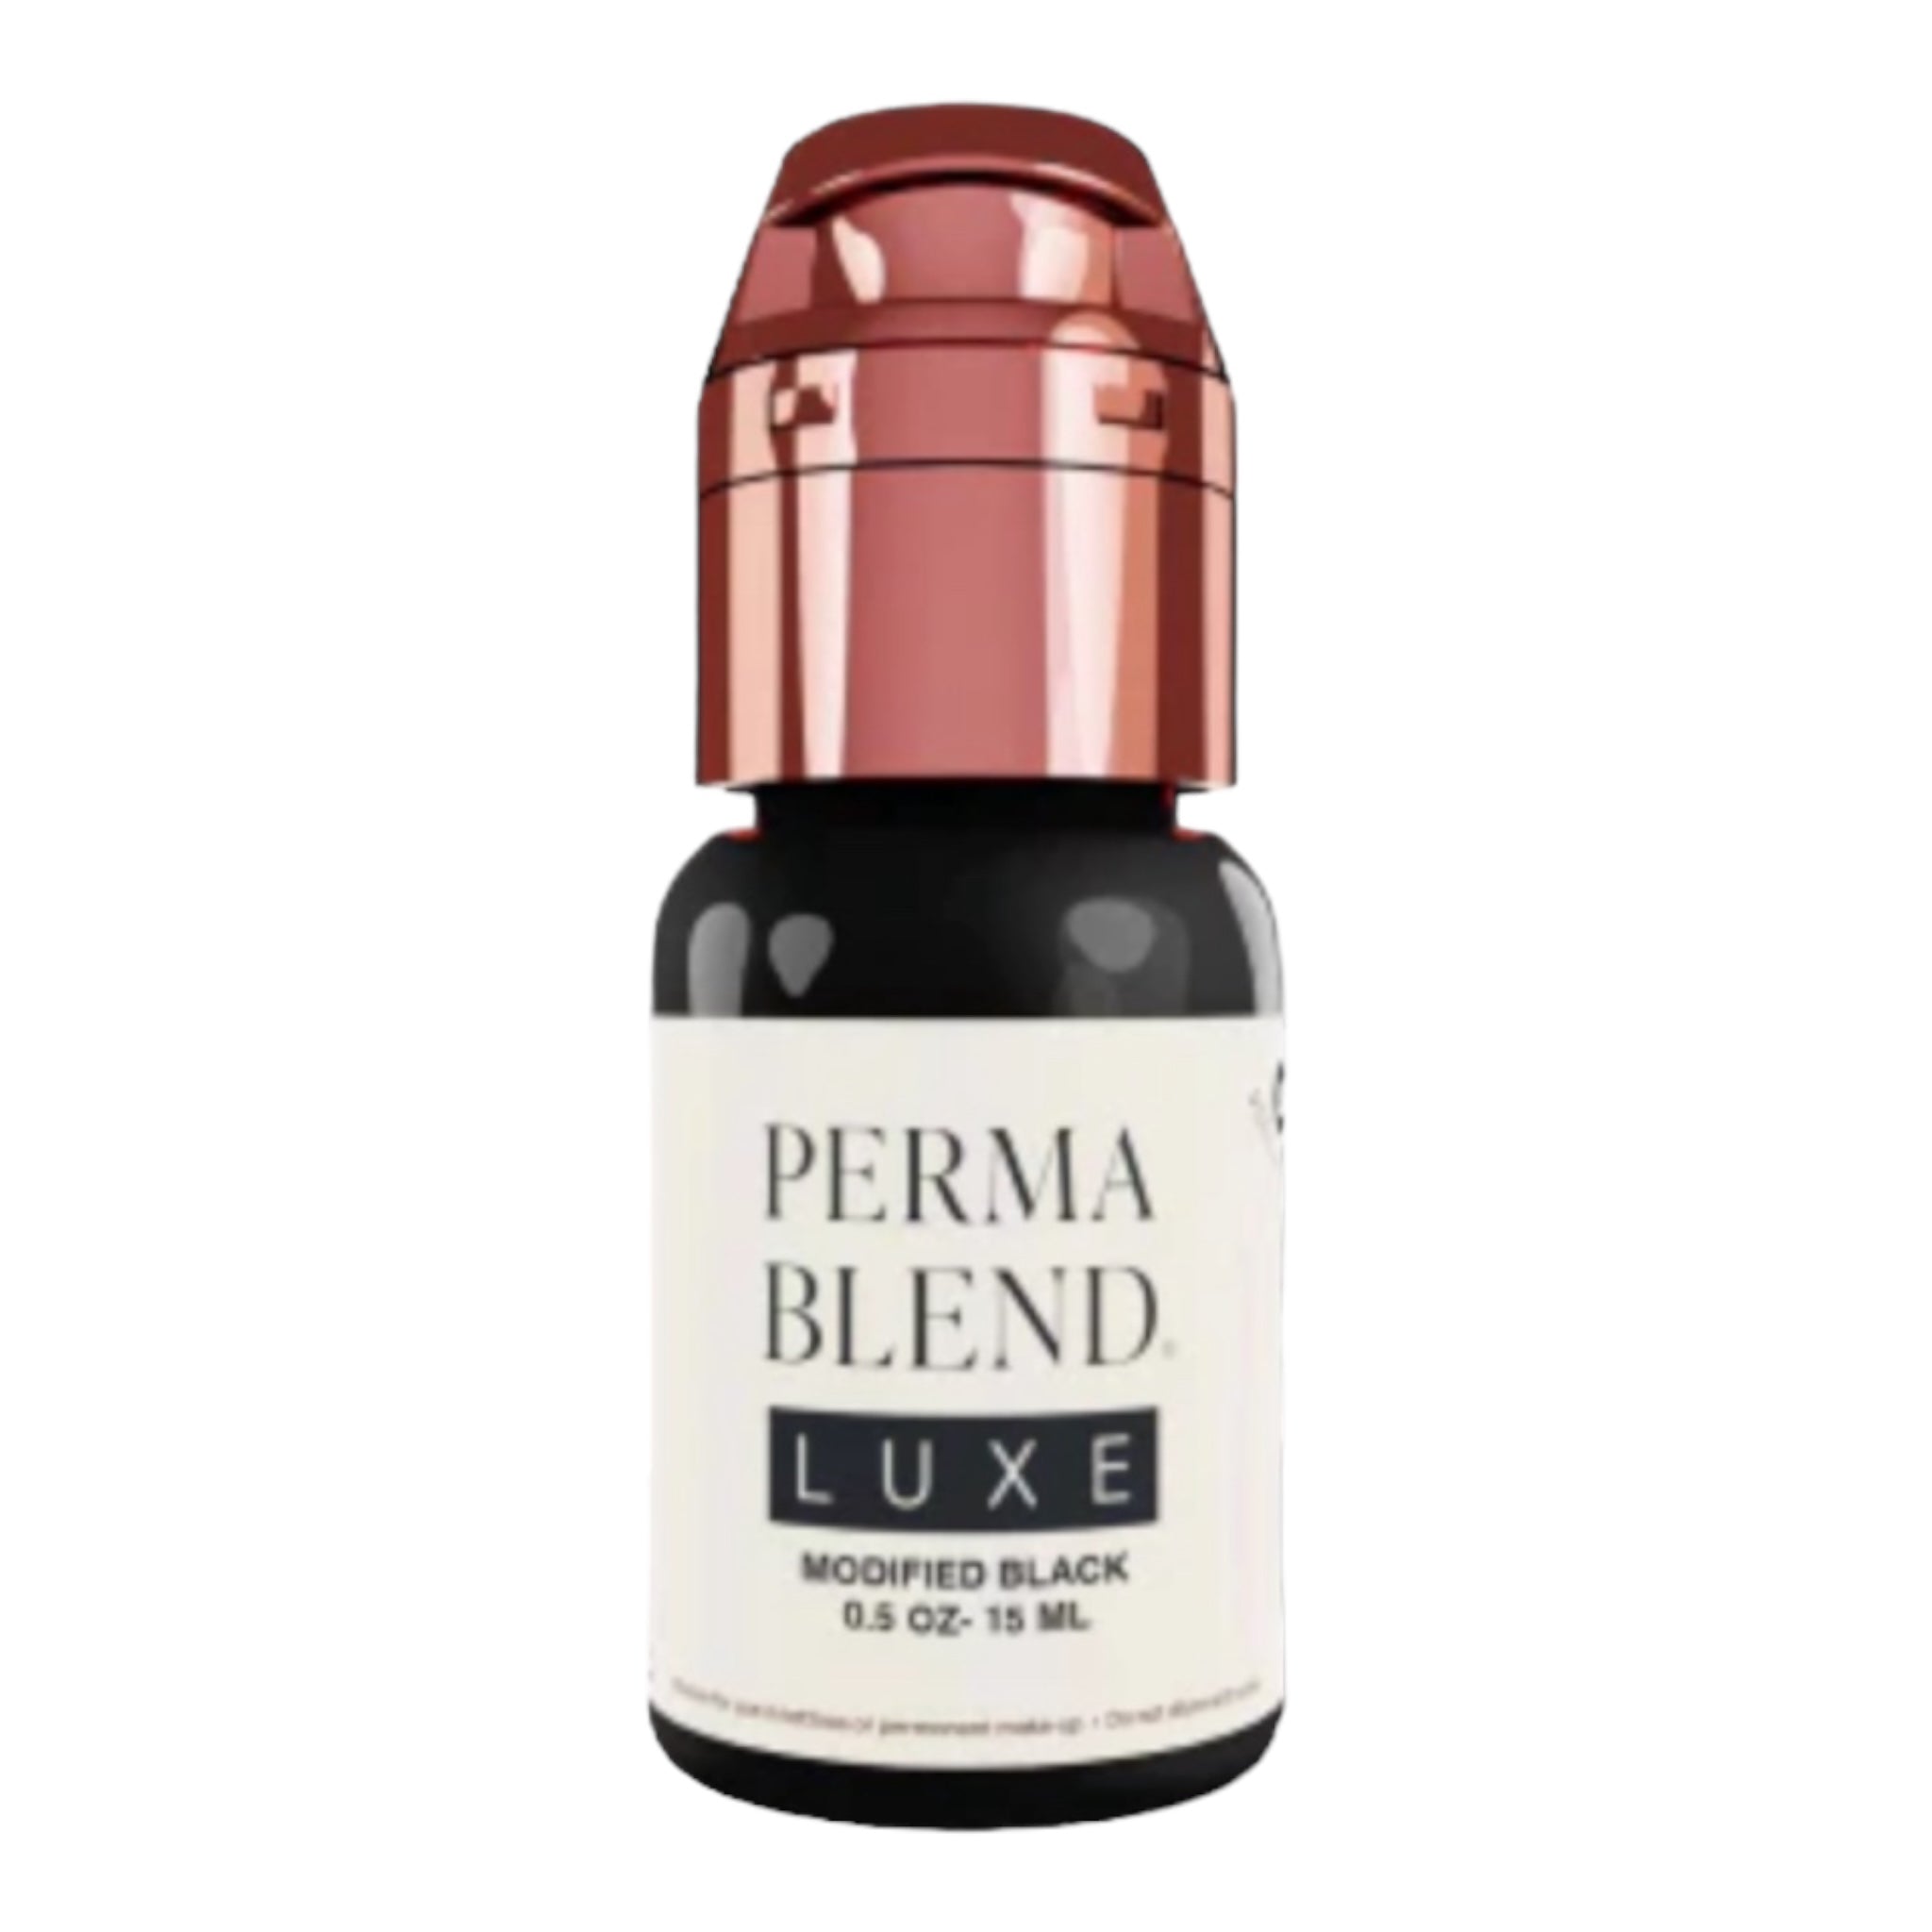 Encre Maquillage Perma Blend Luxe 15ml - Modified Black